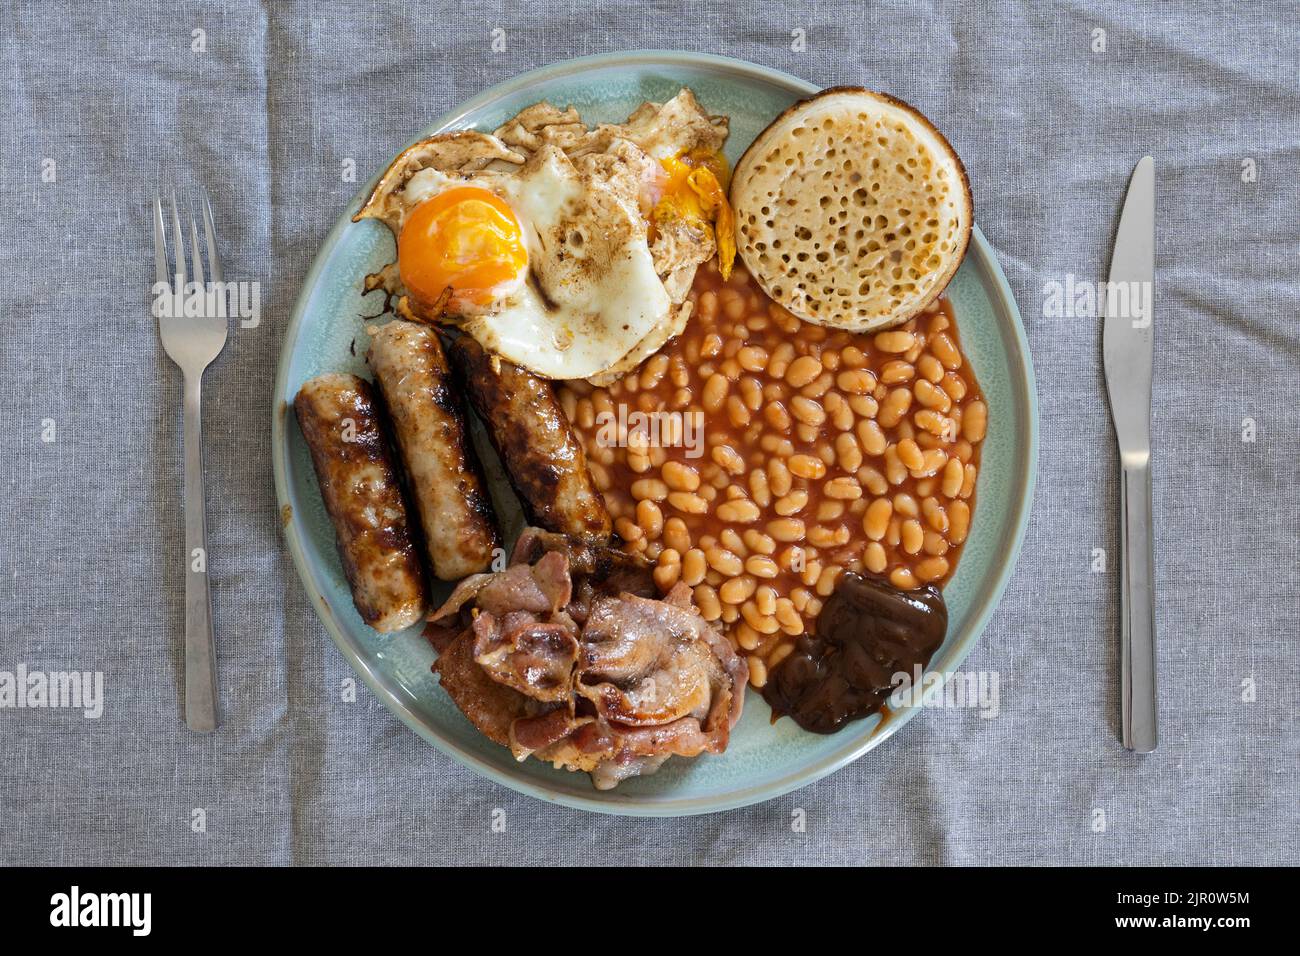 Traditional English breakfast on a table with cutlery - eggs, bacon, sausages, baked beans and a crumpet. UK. Concept - unhealthy eating Stock Photo